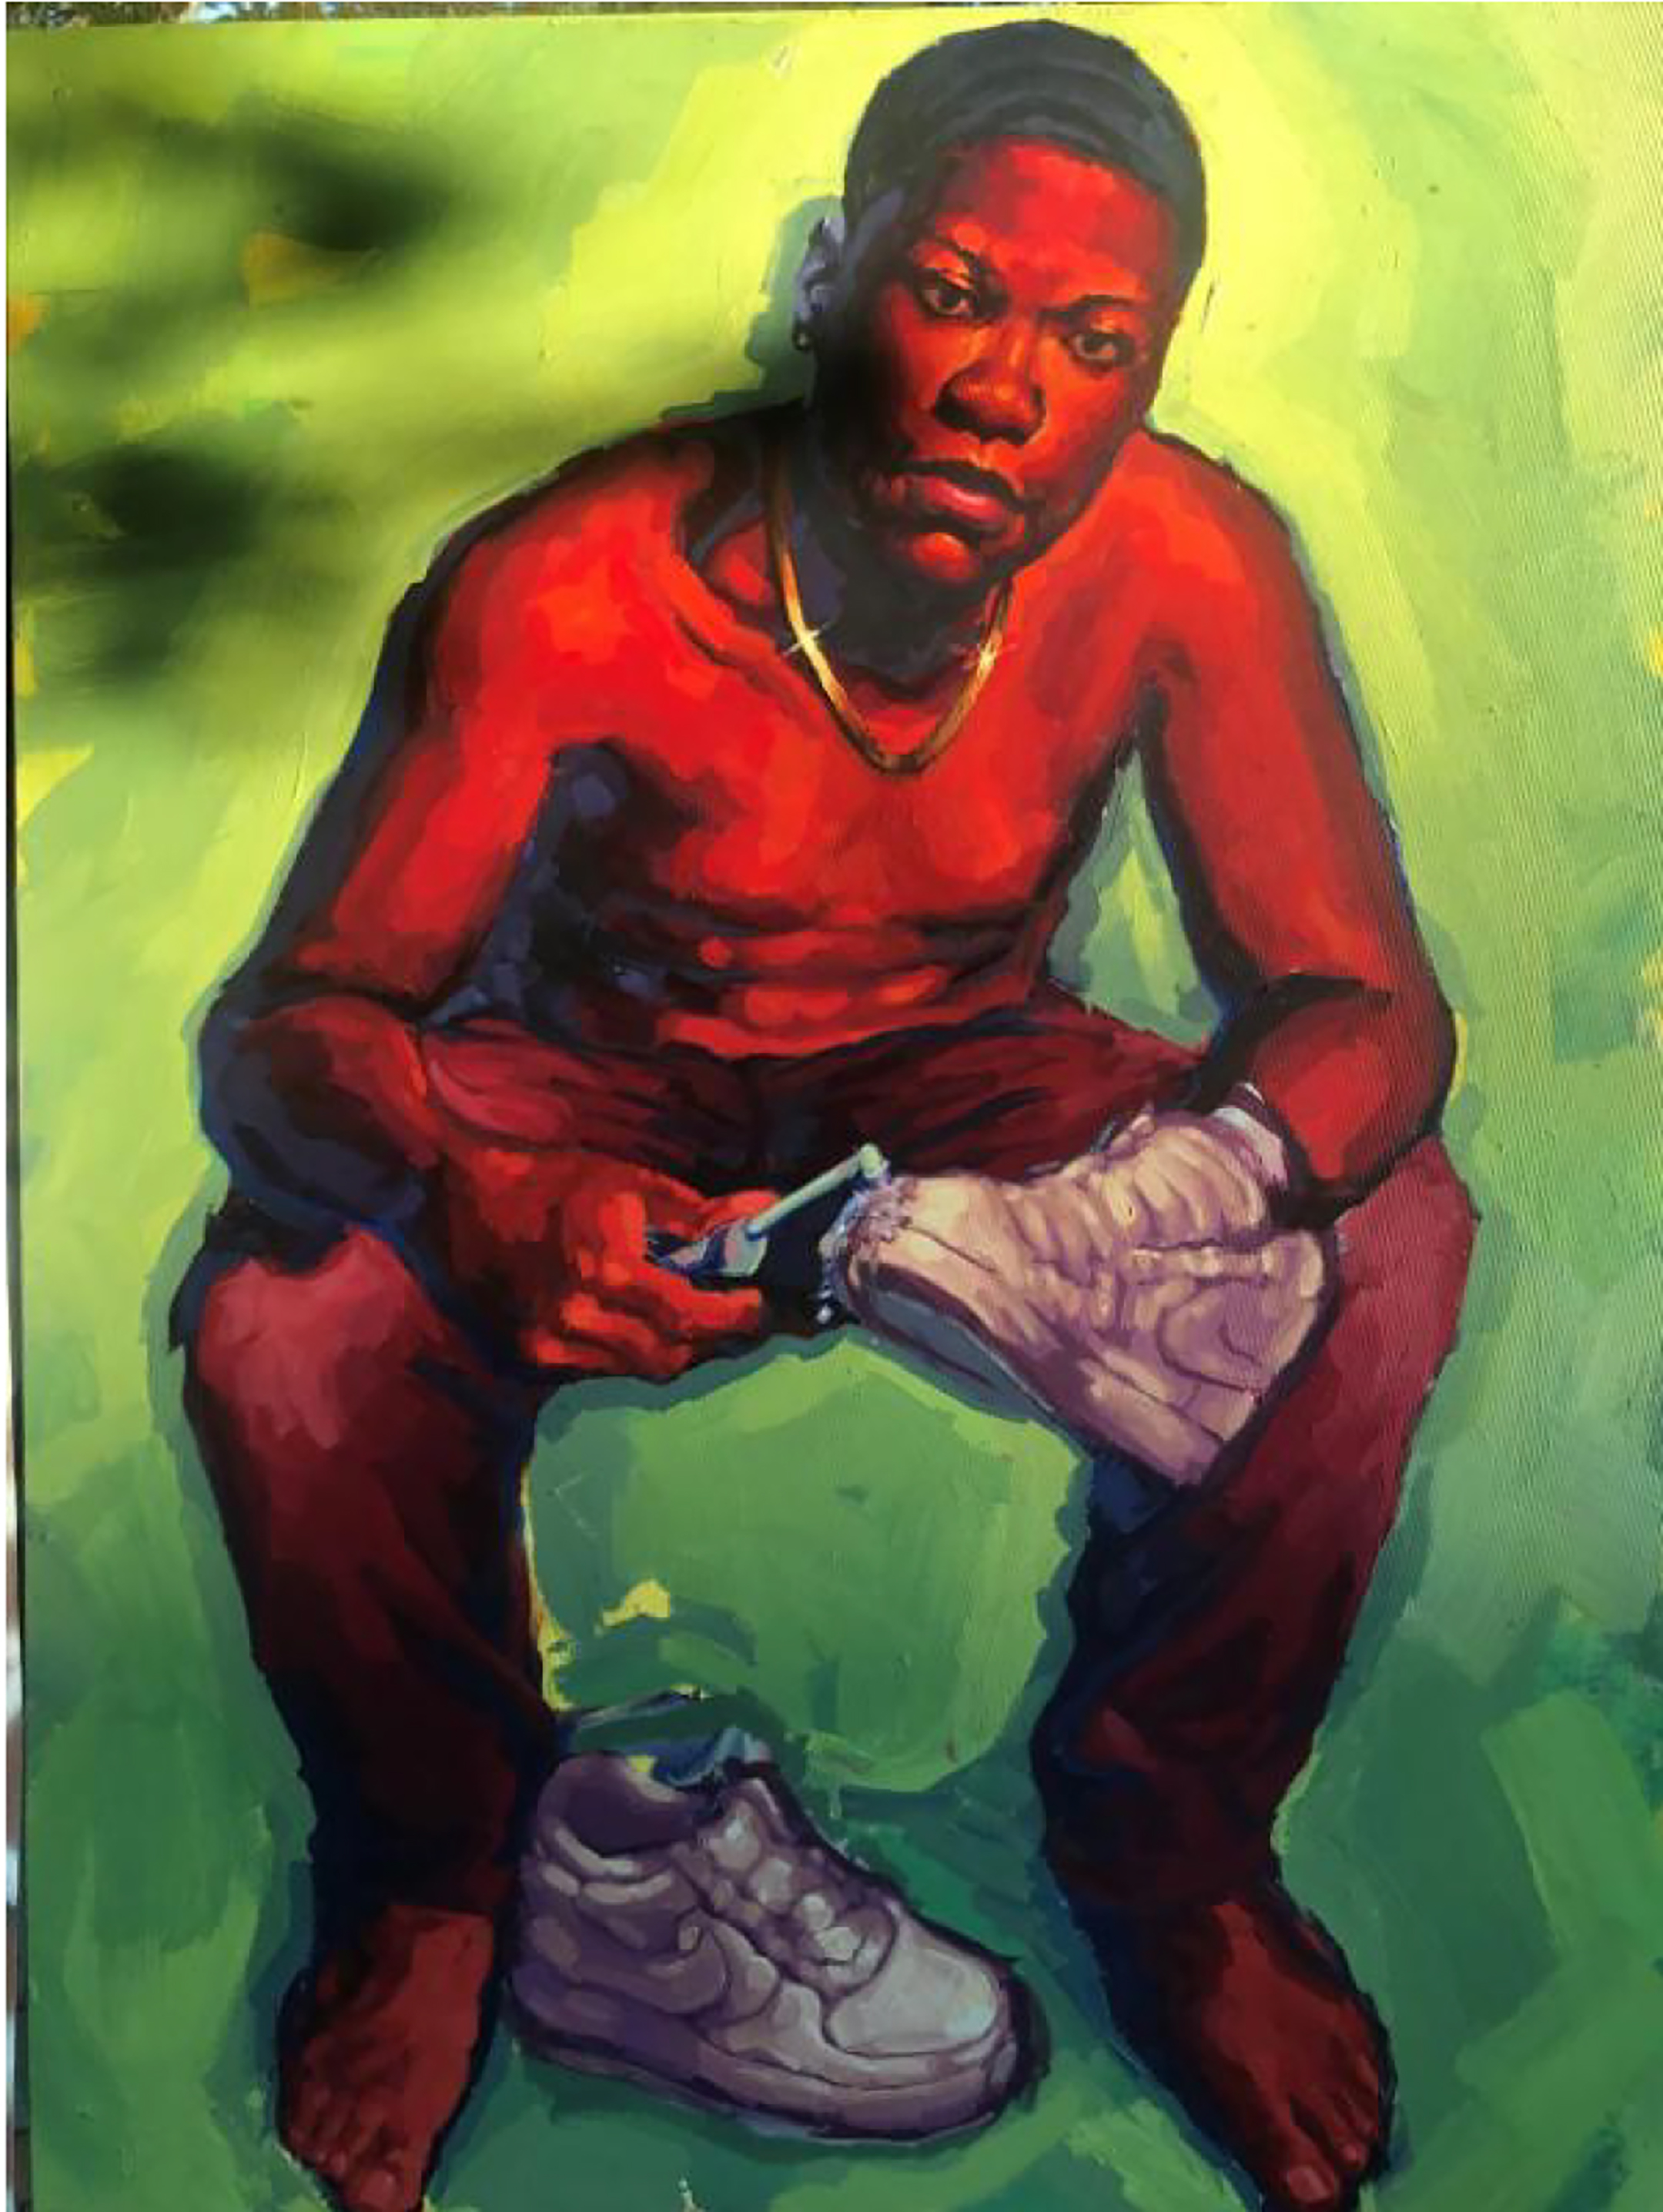 Painting of a young black man, seated and leaning forward, against a green background